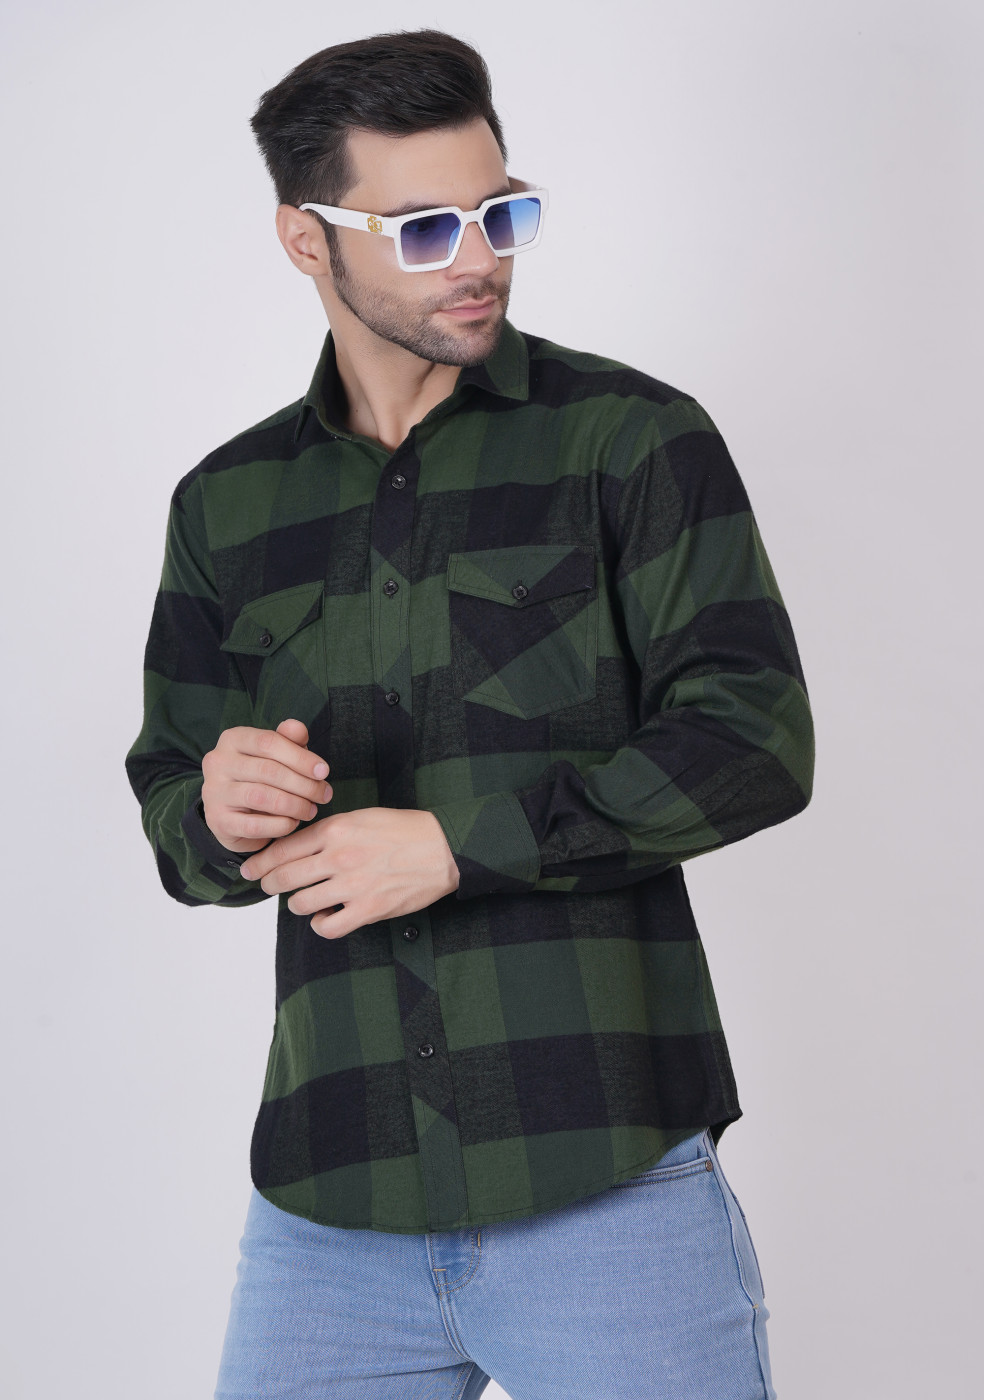 Men's Casual Shirt for Winter